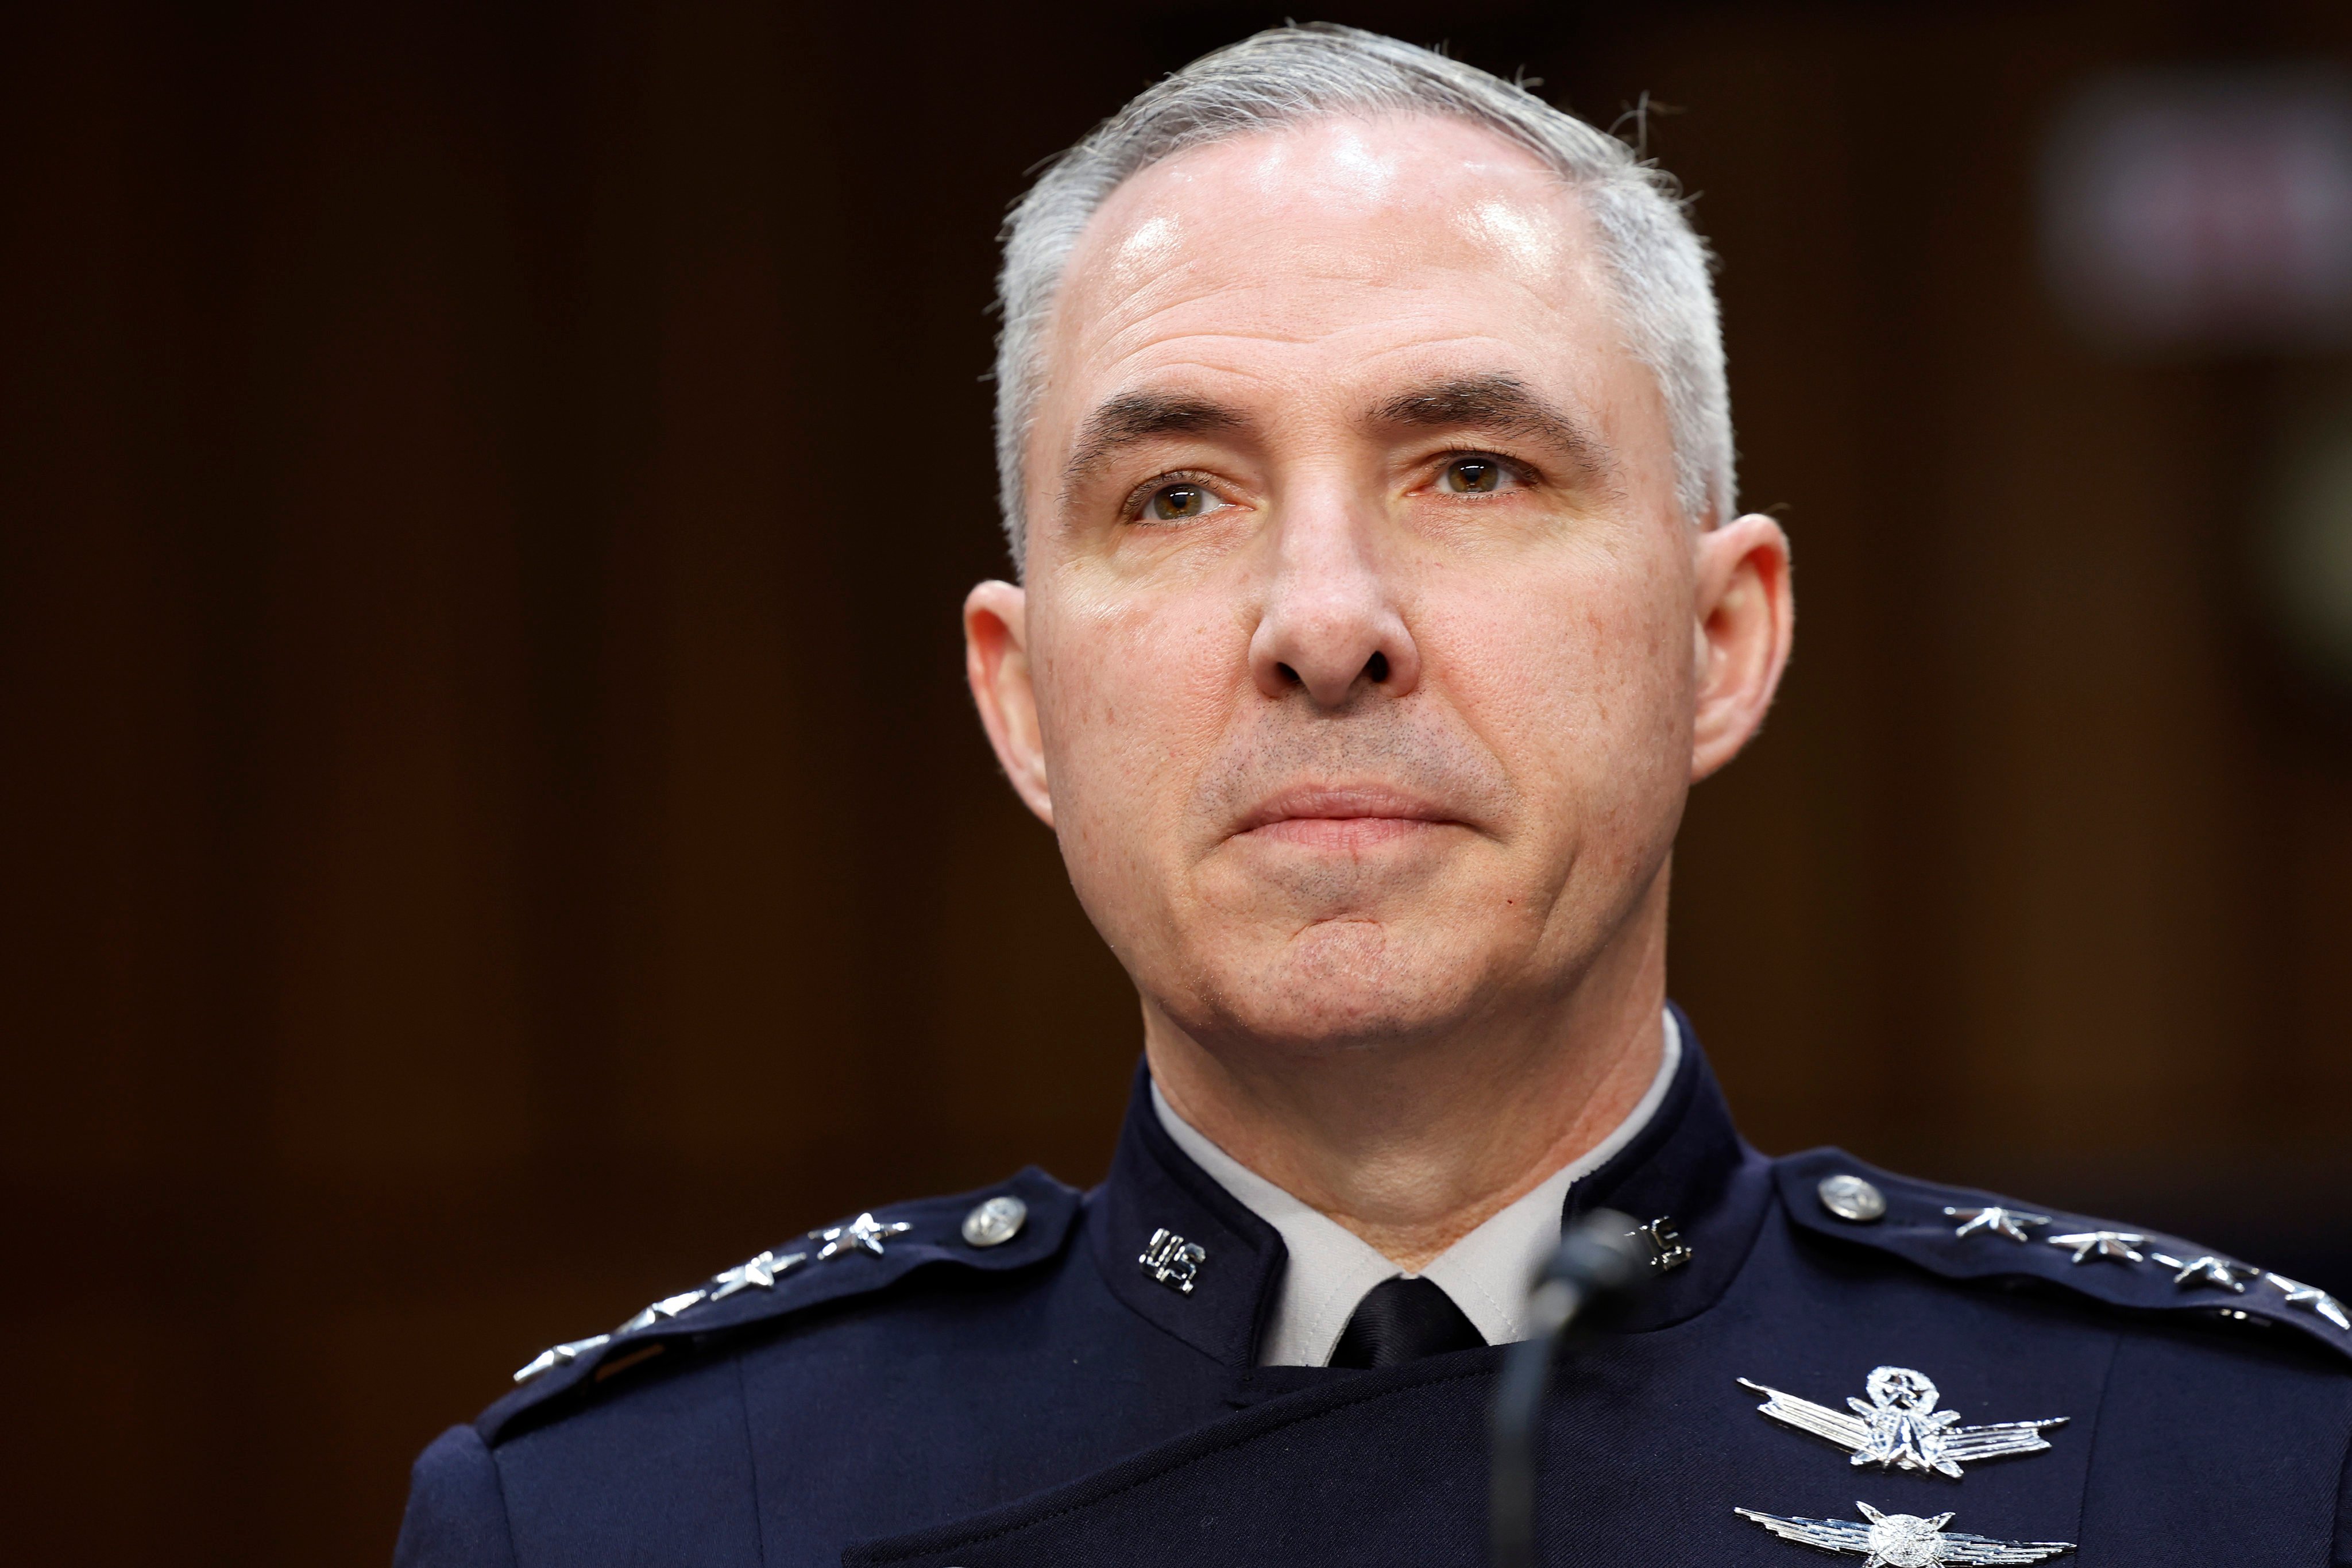 US Space Force General Stephen Whiting has said China’s military space abilities are growing at a “breathtaking pace”. Photo: Getty Images